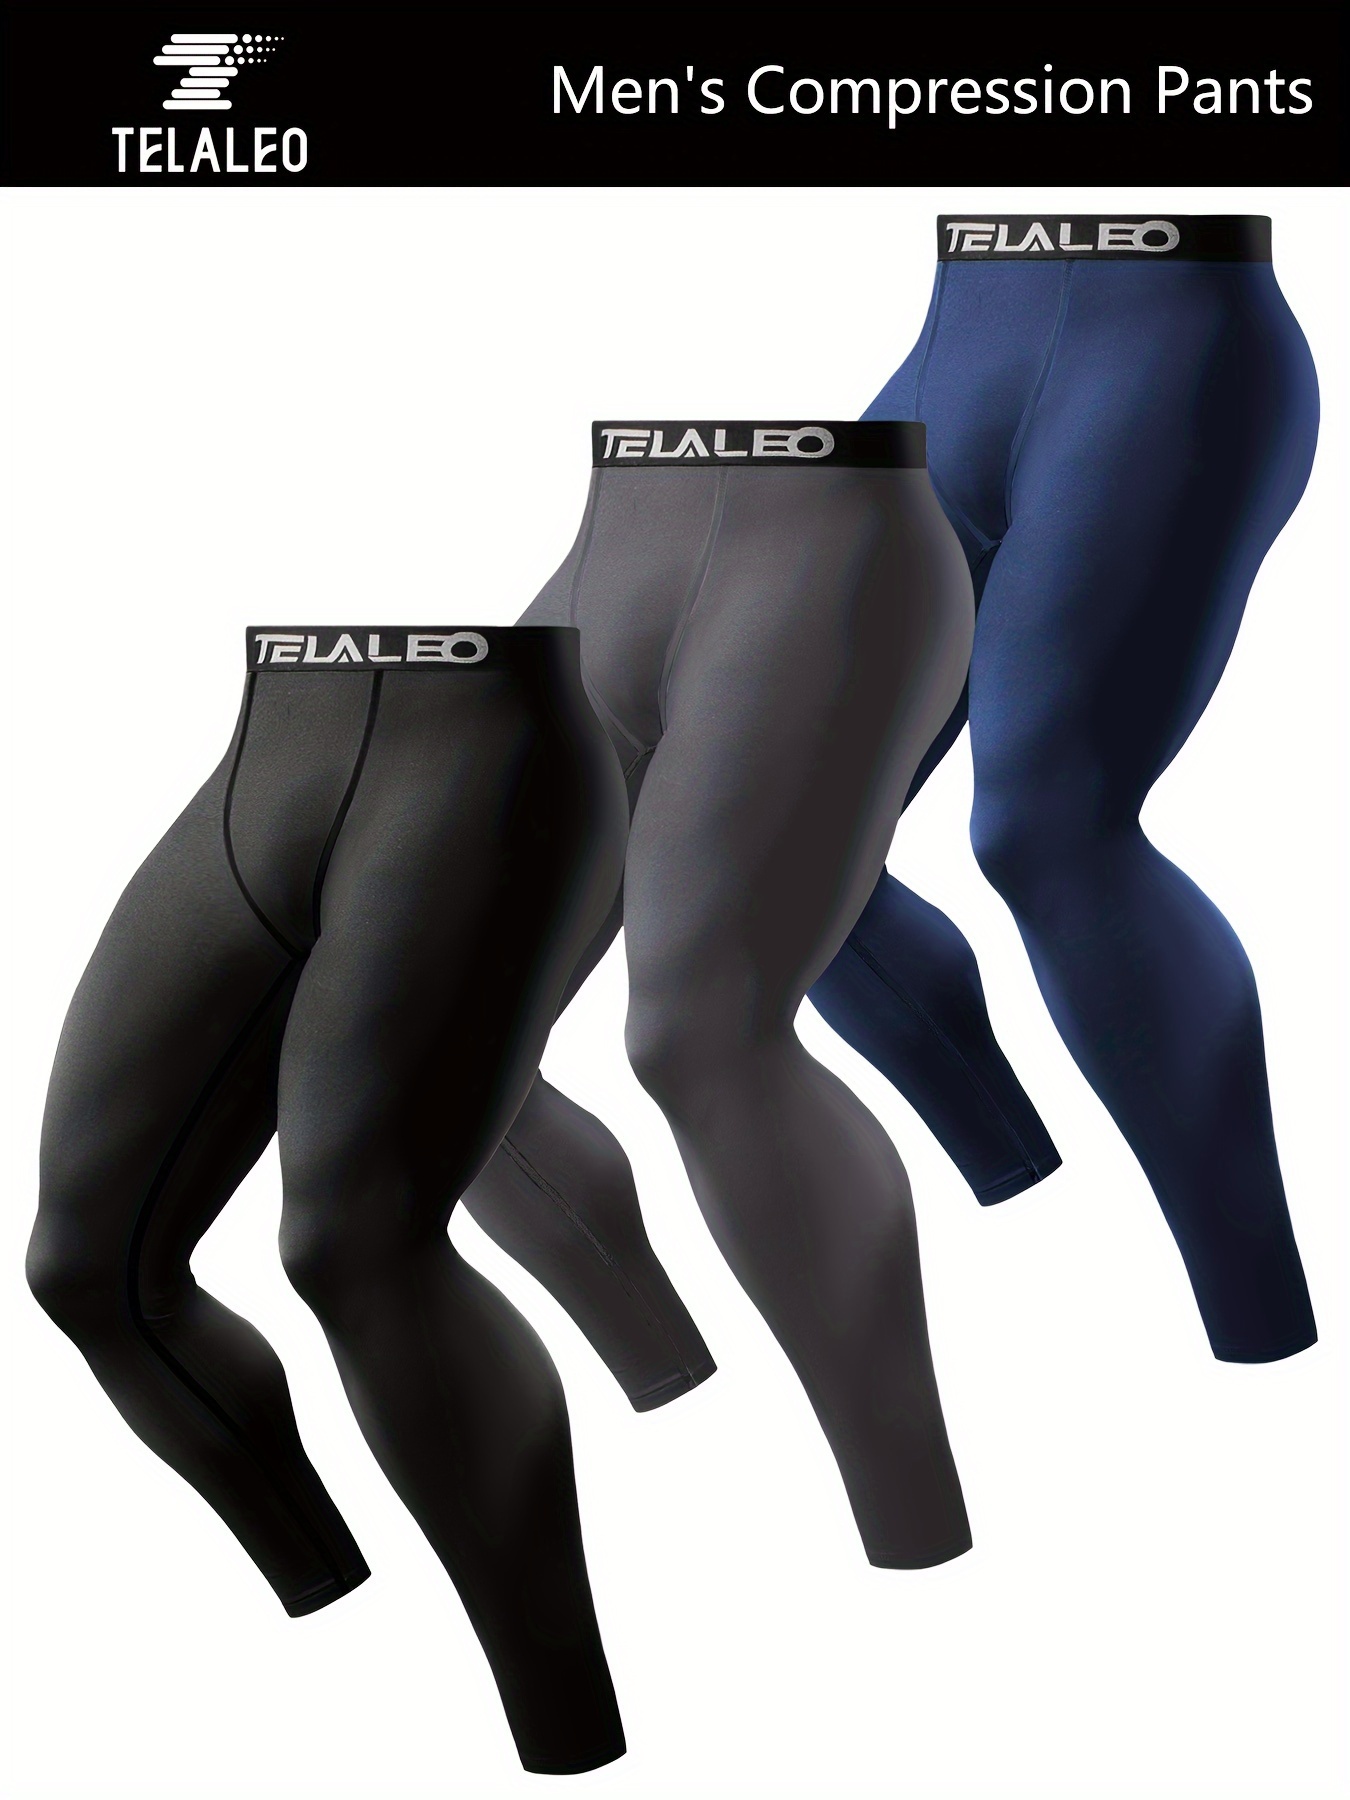 X-2 Men's Compression Pants Running Tights Base Layer Leggings Gym Sports  Skin Tights